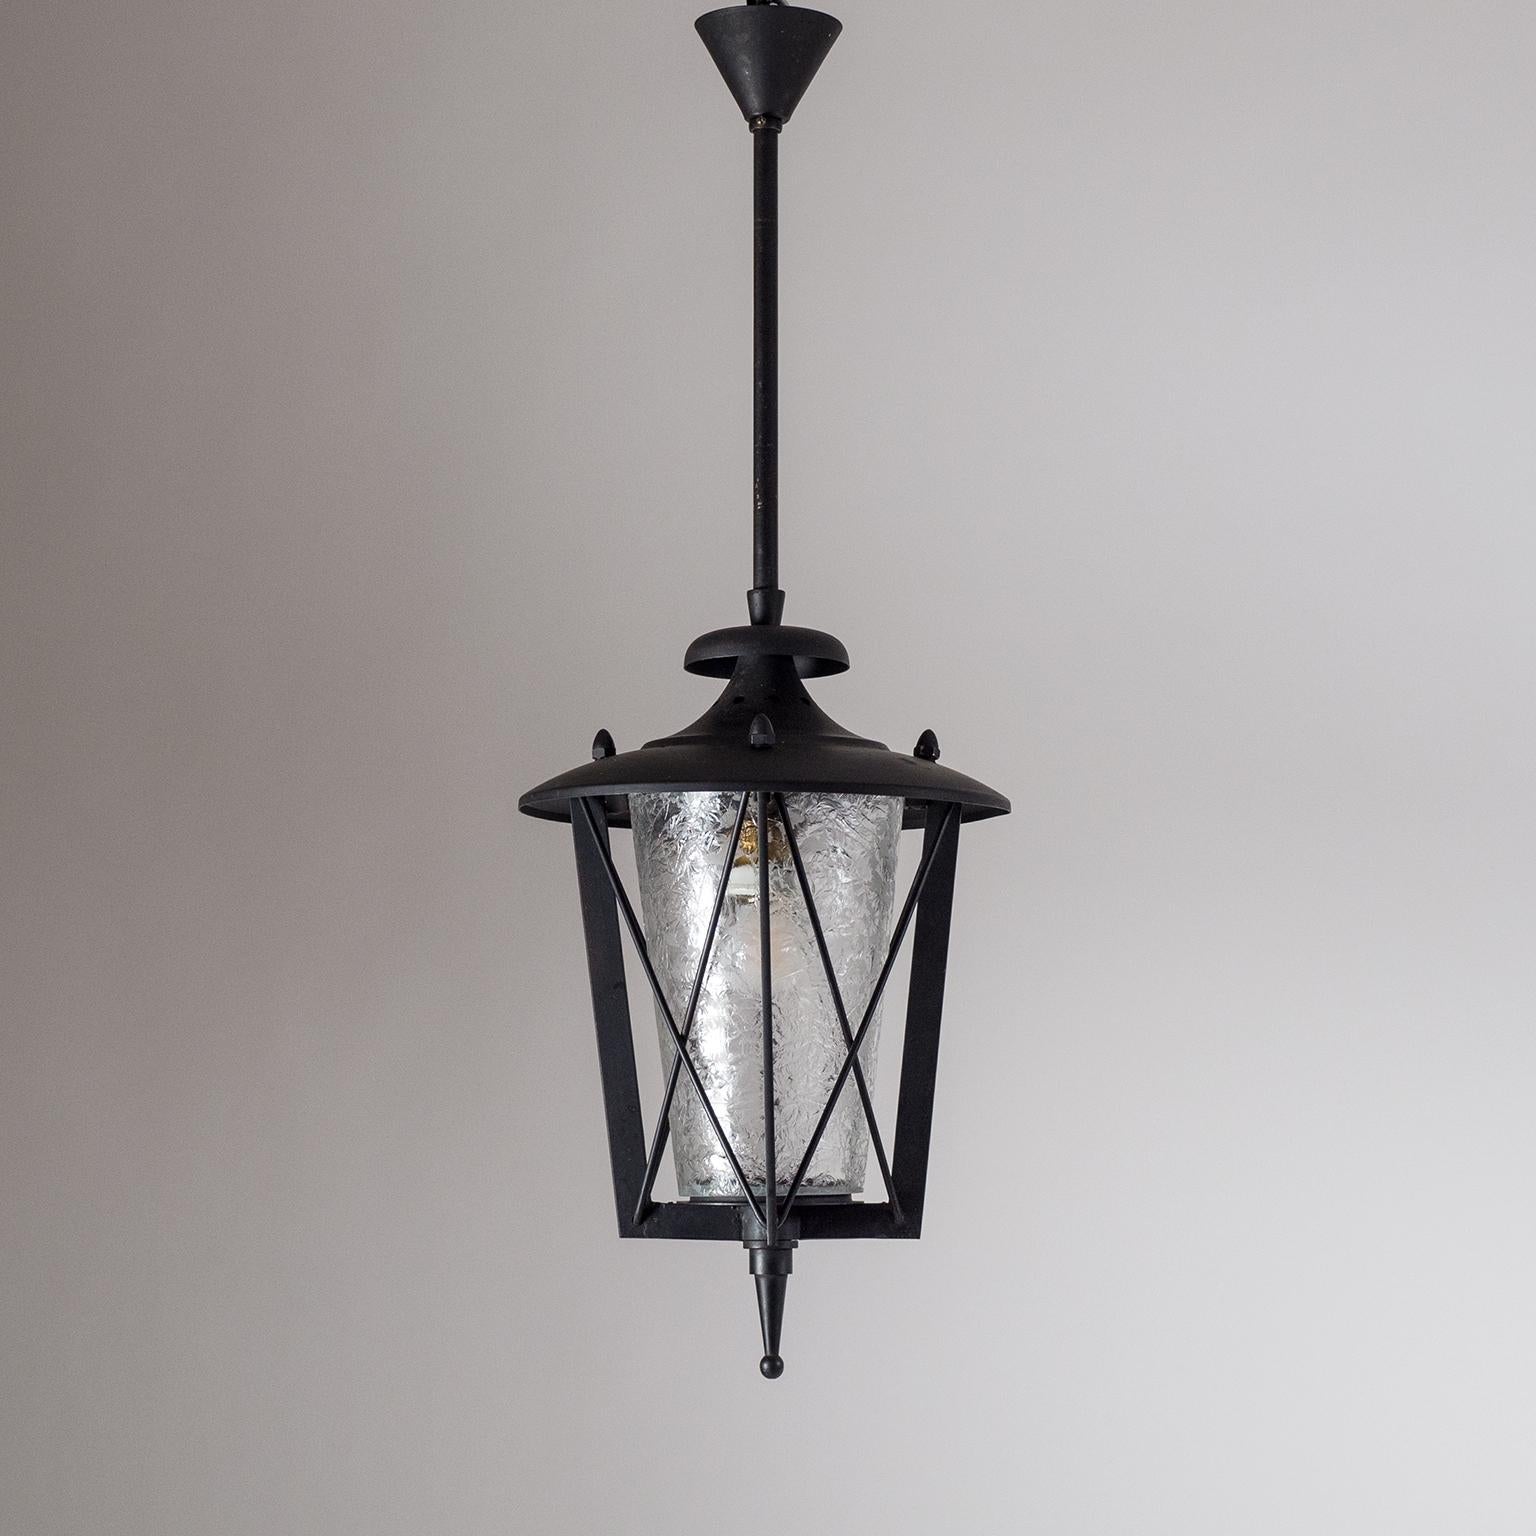 Very rare French outdoor lantern, circa 1950. Blackened steel Art Deco hardware with a chiseled glass diffuser in the style of Max Ingrand. This technique was pioneered by French Art Deco glass masters of the 1930s whereby the surface of the glass